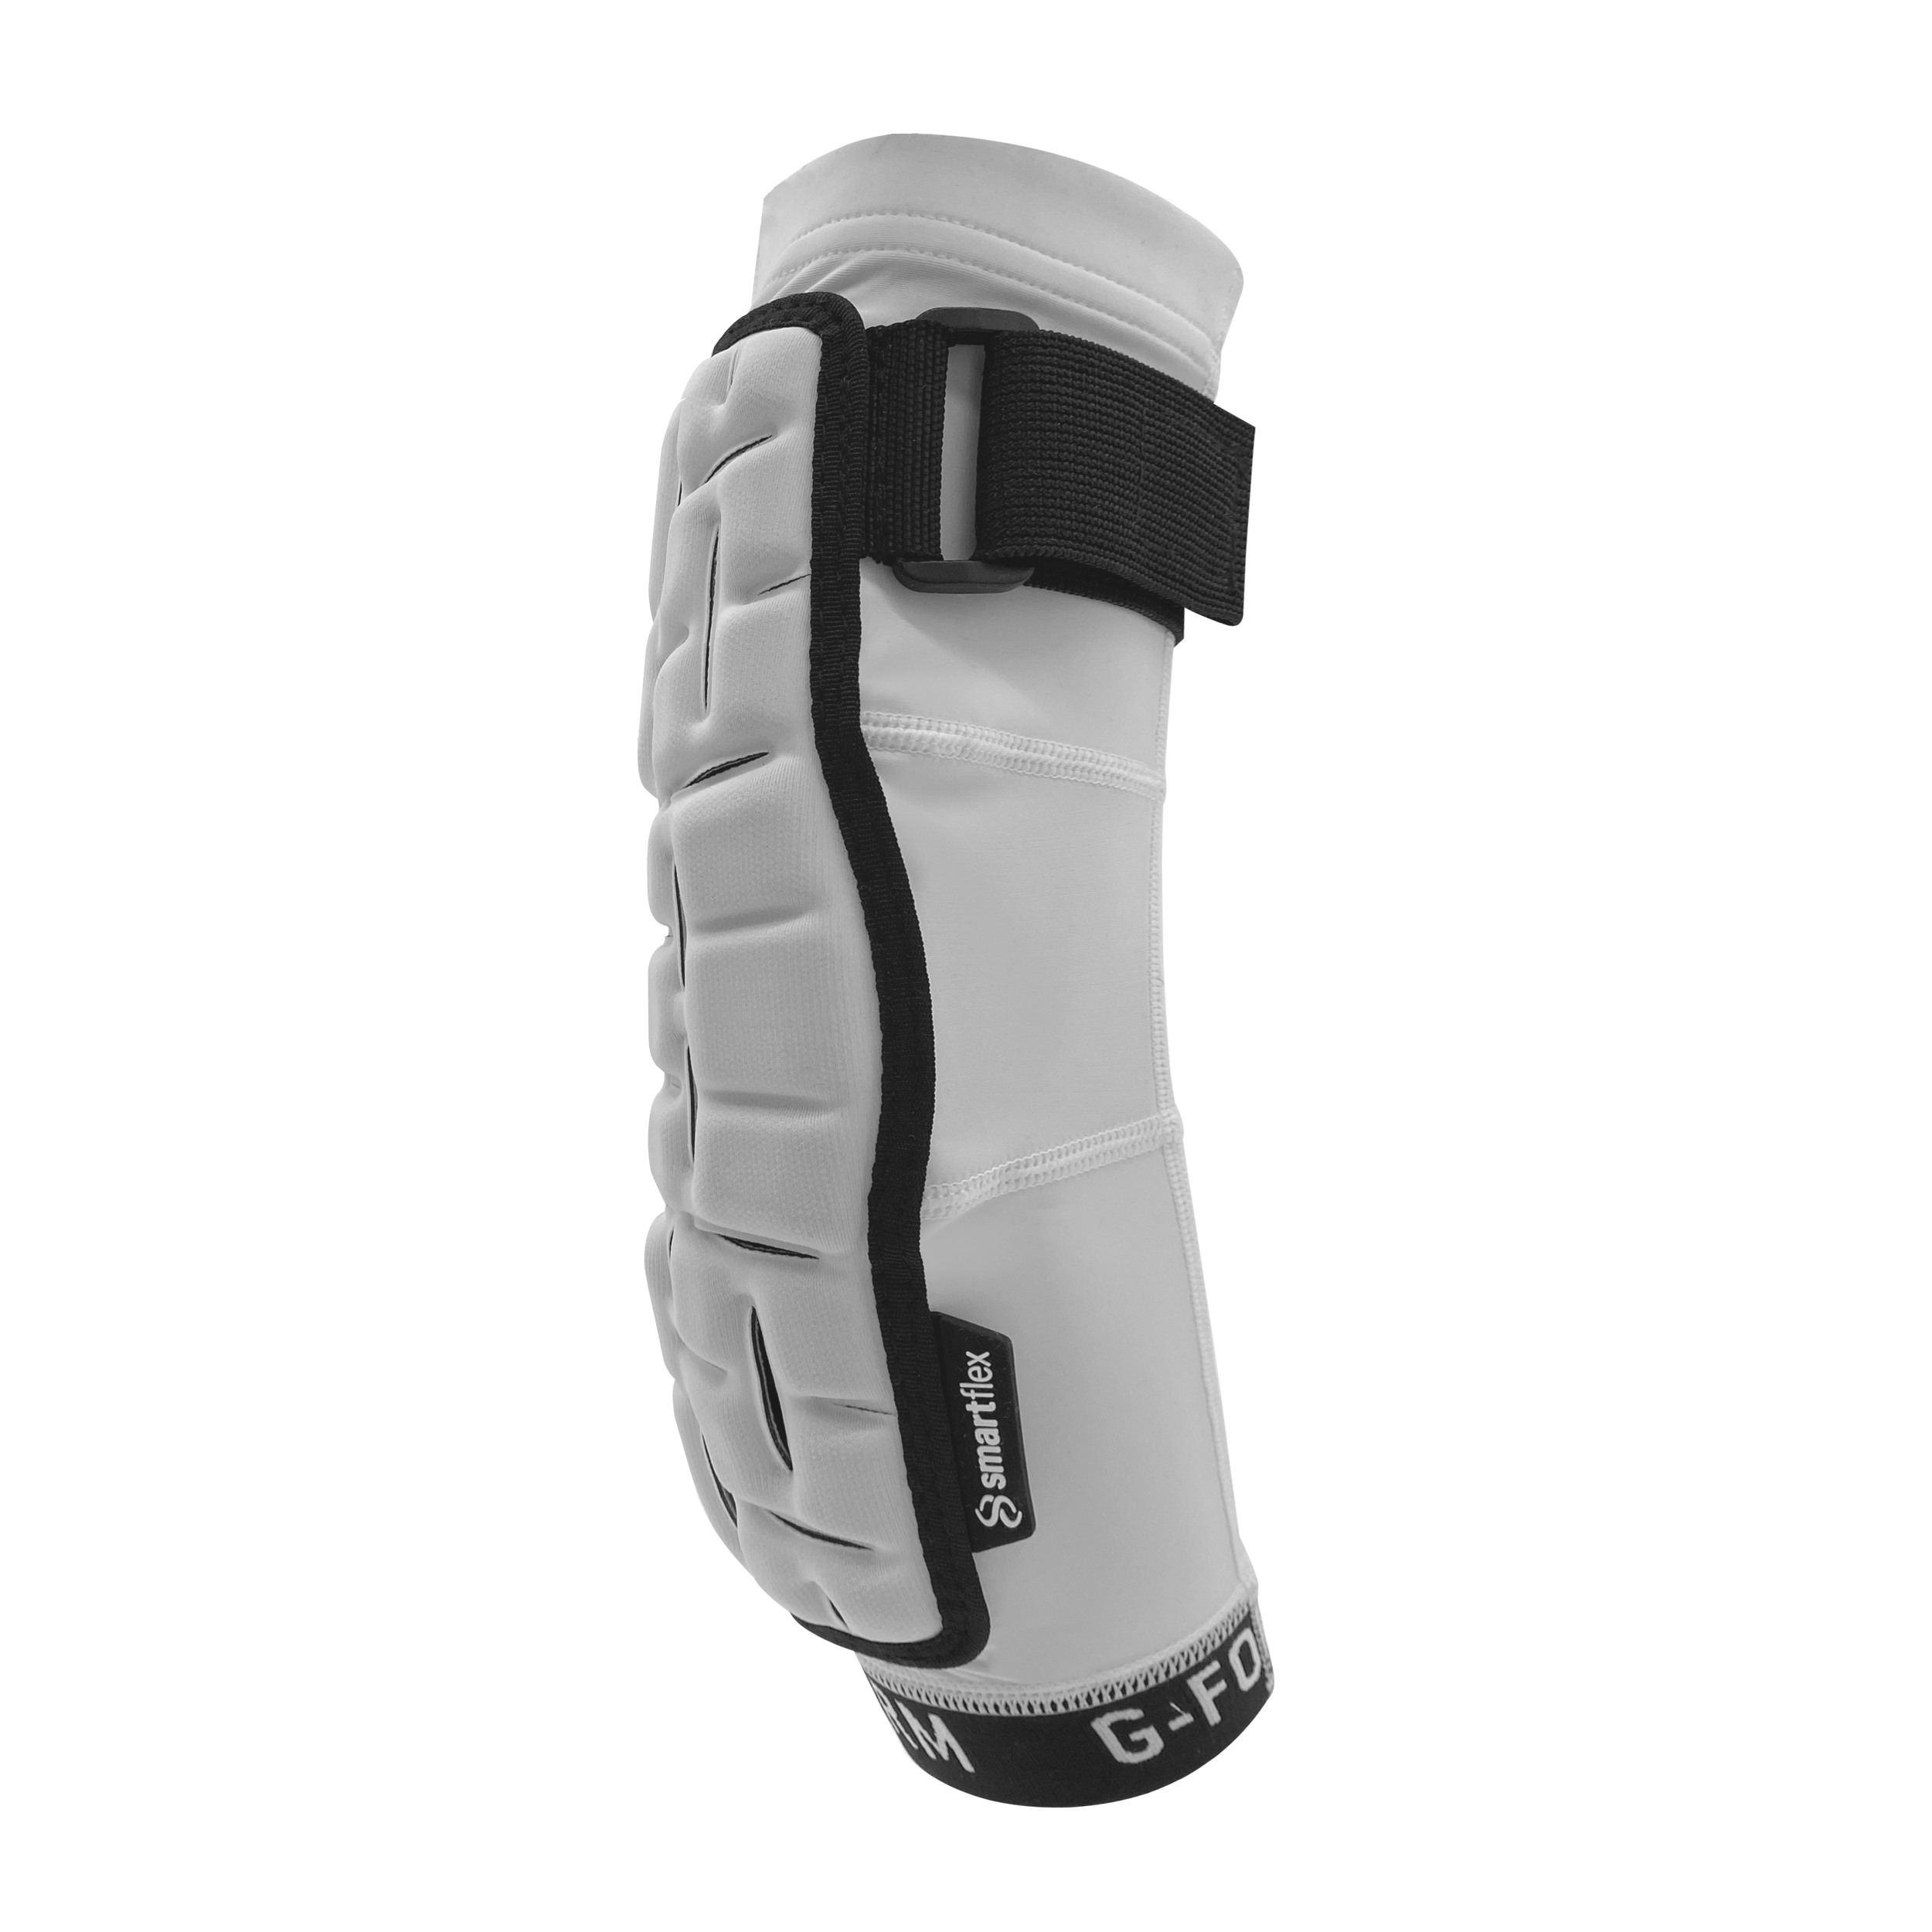 Youth Lacrosse Arm Guard GFX800 Should Liner Chest Protection NOCSAE Commotio Cordis Certified Tucker Dordevic Product Image